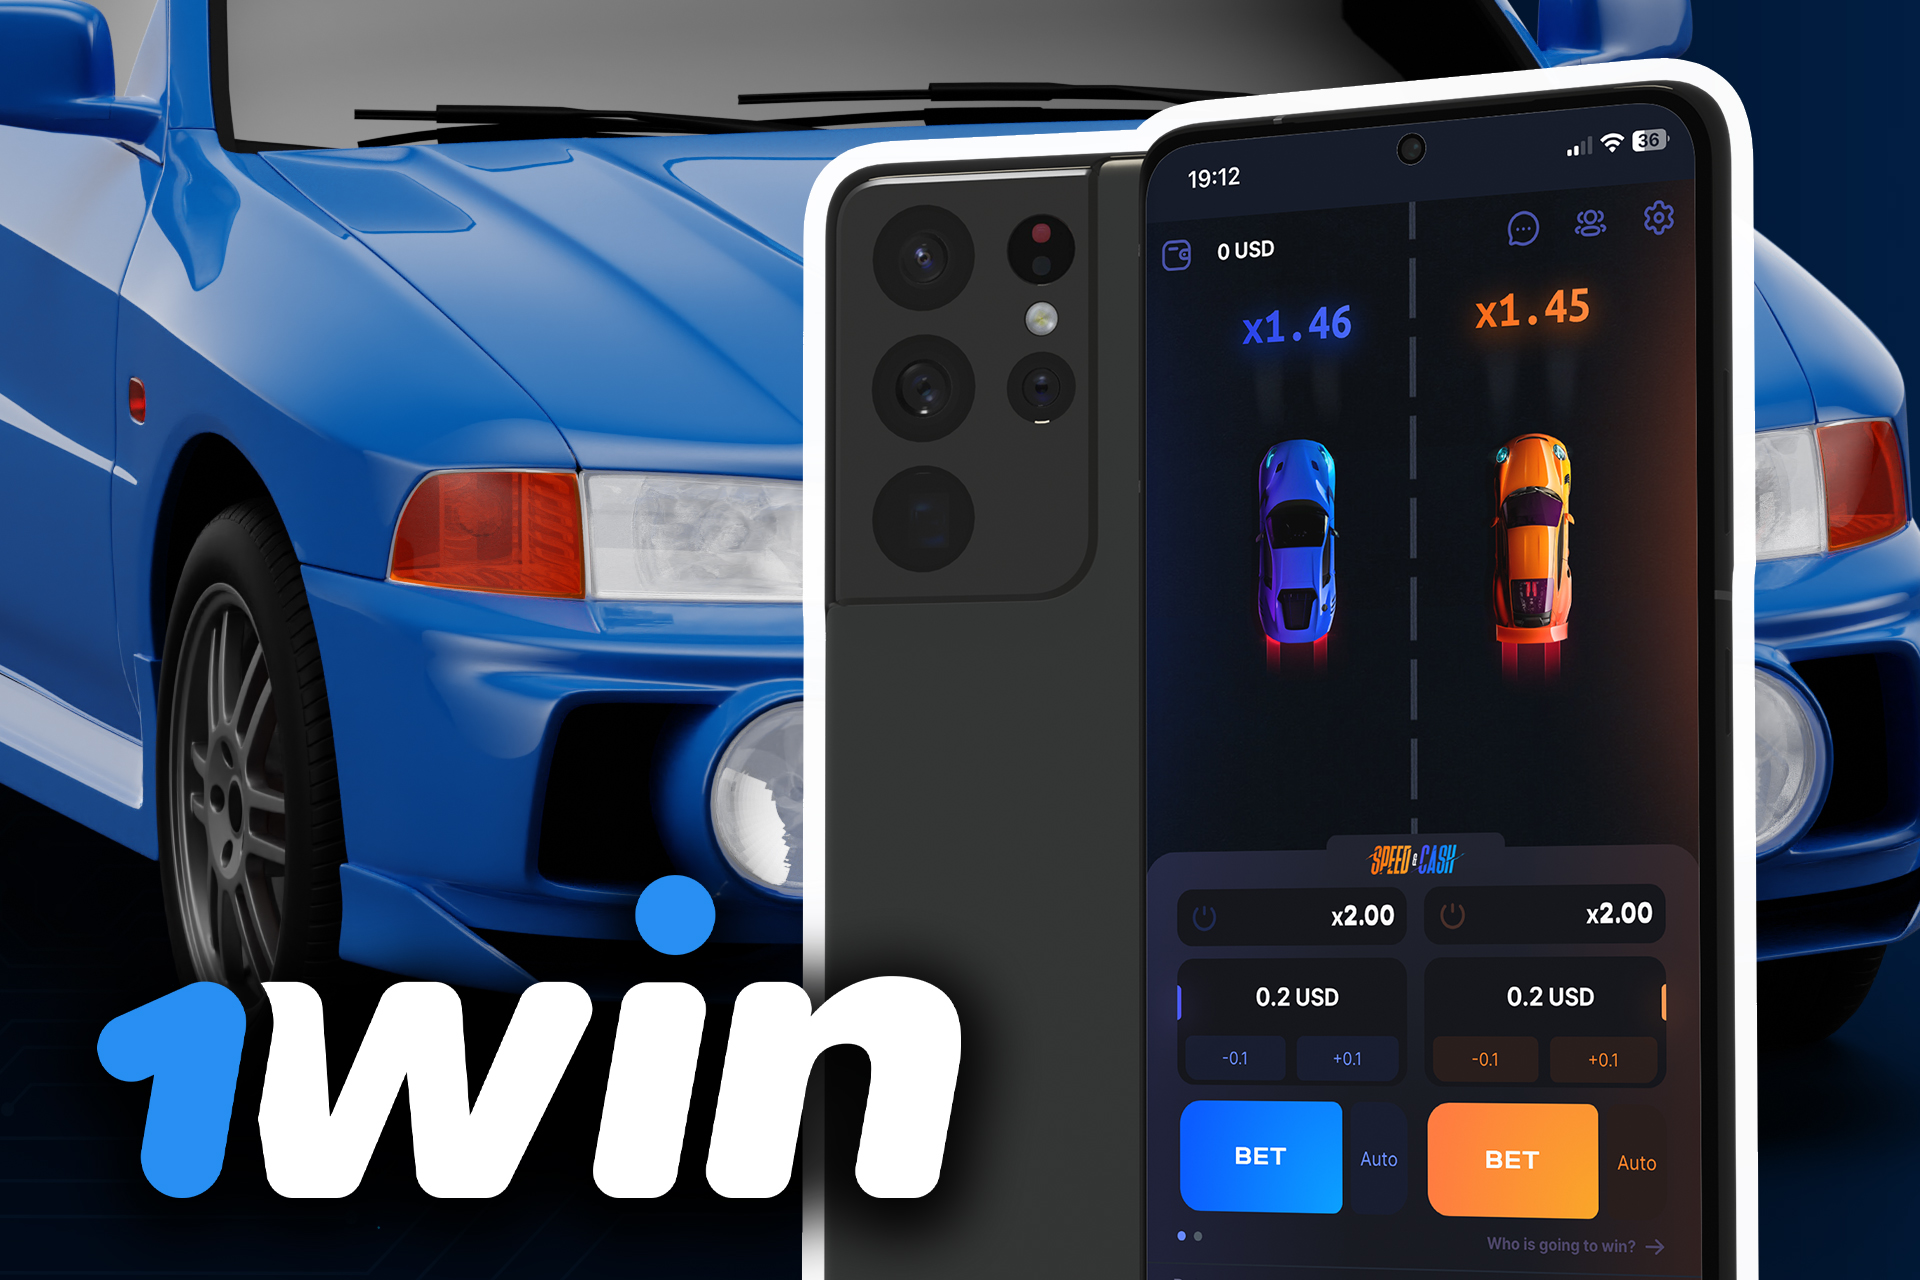 Open the 1win official website and download the Speed and Cash game in your smartphone.